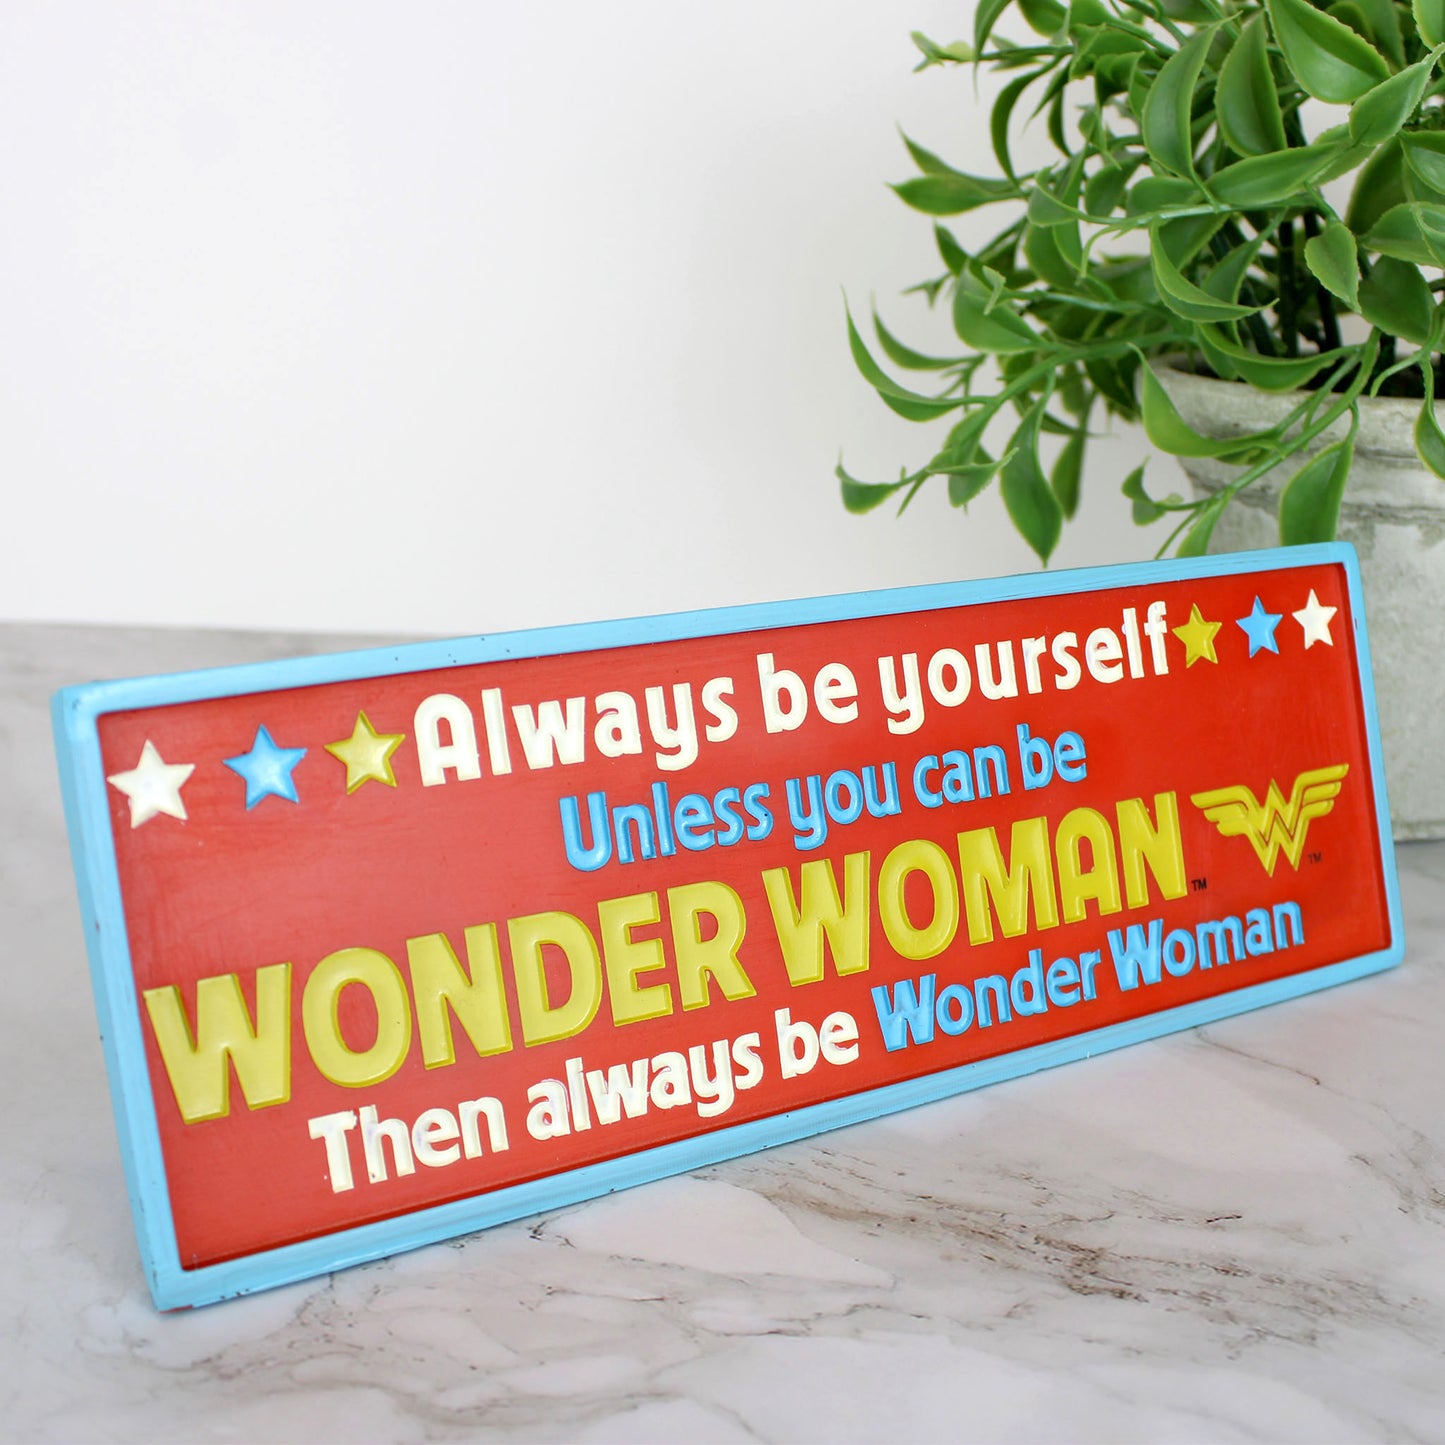 Load image into Gallery viewer, Wonder Woman (DC Comics) Resin Desk Sign
